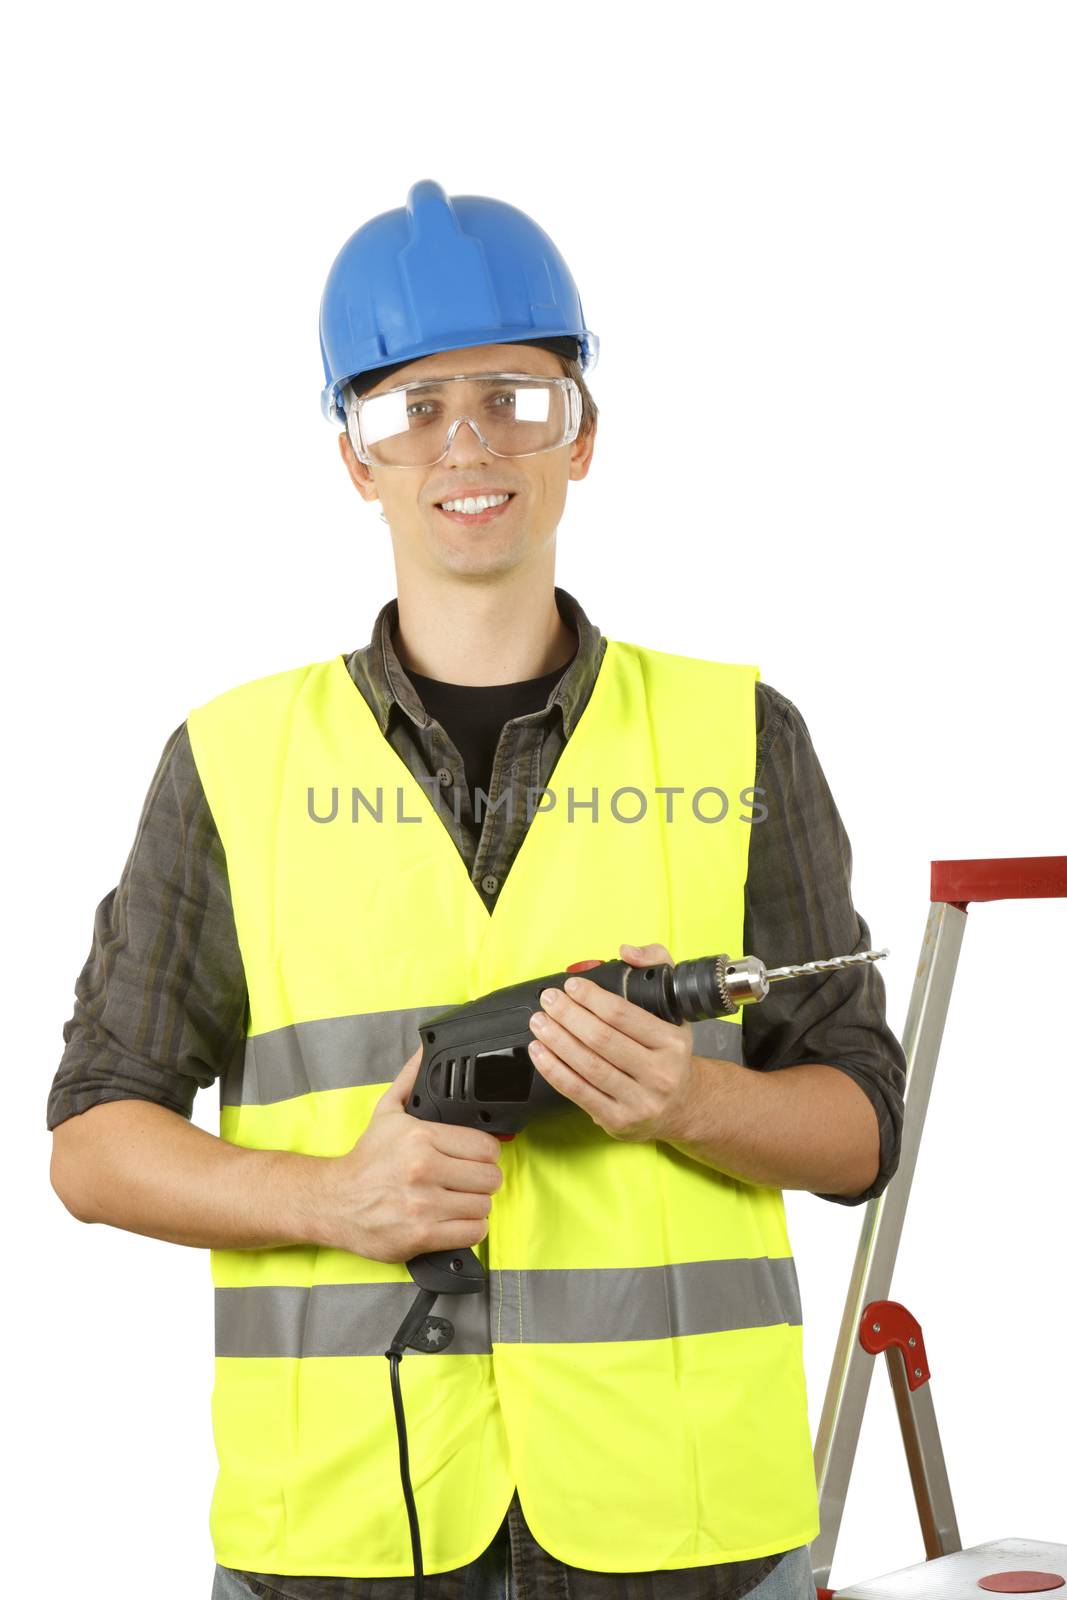 Worker man holding a power drill.
––––
[url=http://www.istockphoto.com/file_search.php?action=file&lightboxID=8026155&perPage=30&showContributor=true&showDownload=true&showTitle=true&order=4&within=1][img]http://www.penelopecayero.com/stock/isolated_people.jpg[/img][/url]